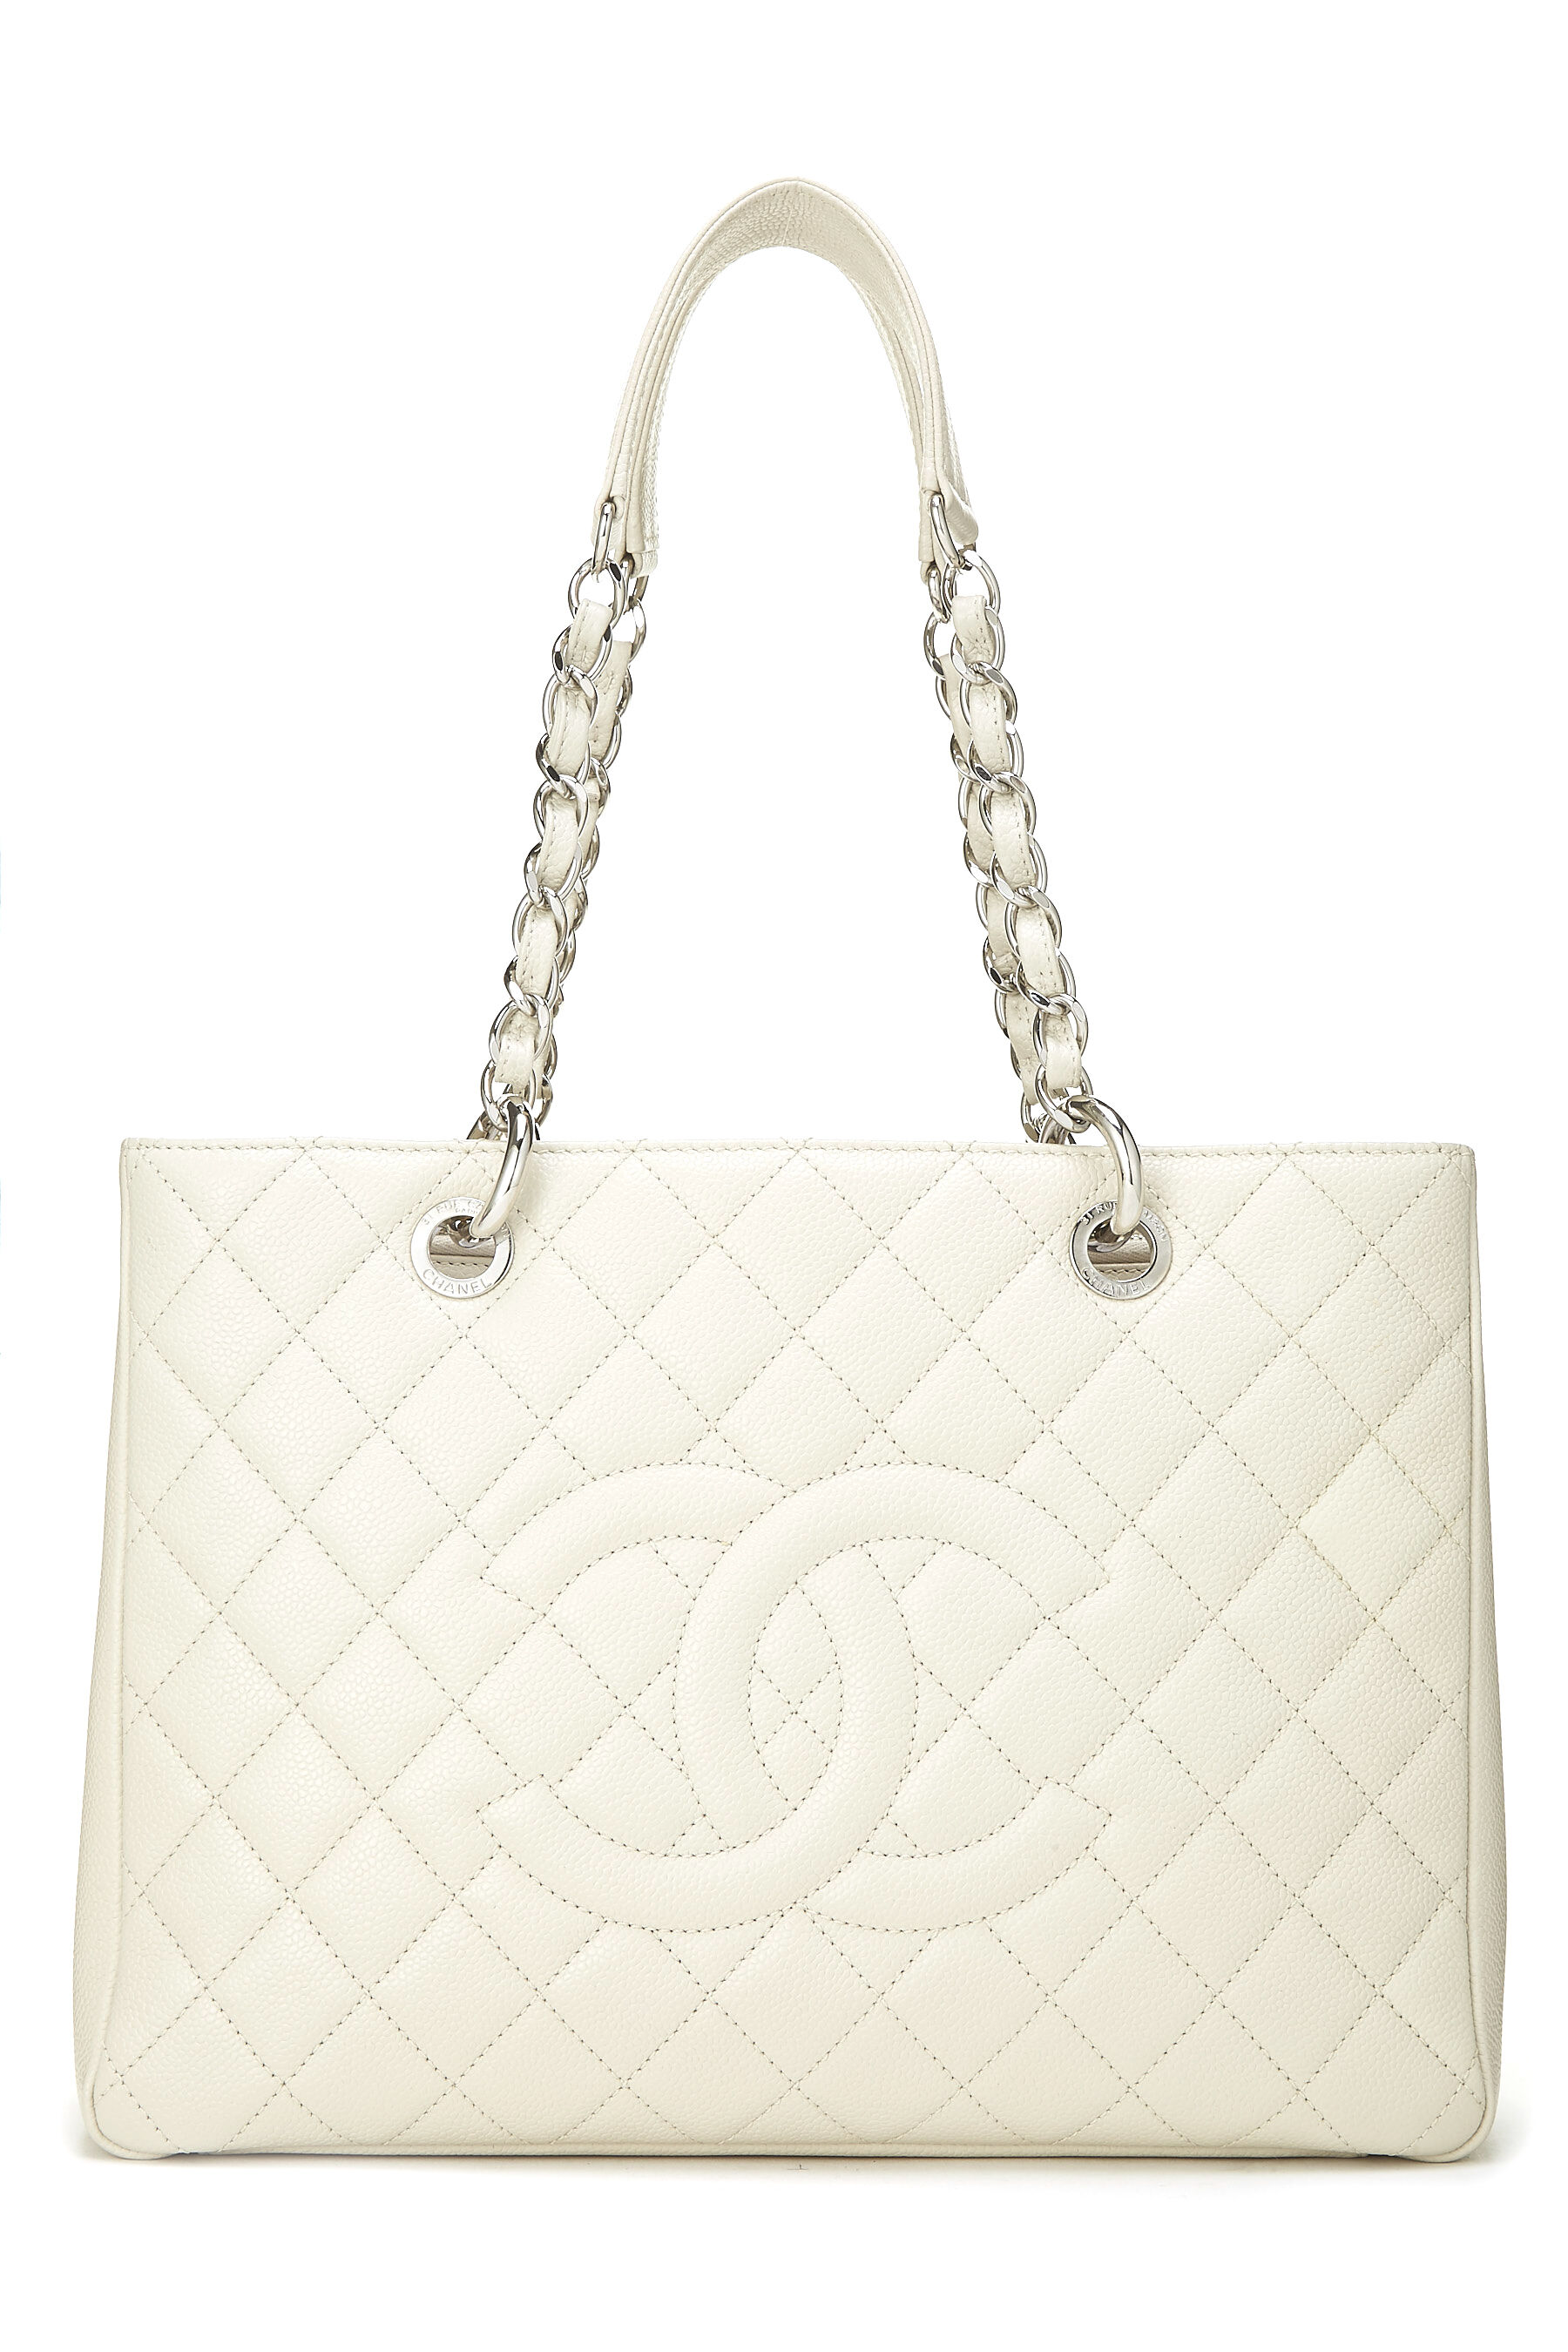 chanel bags shopping tote canvas